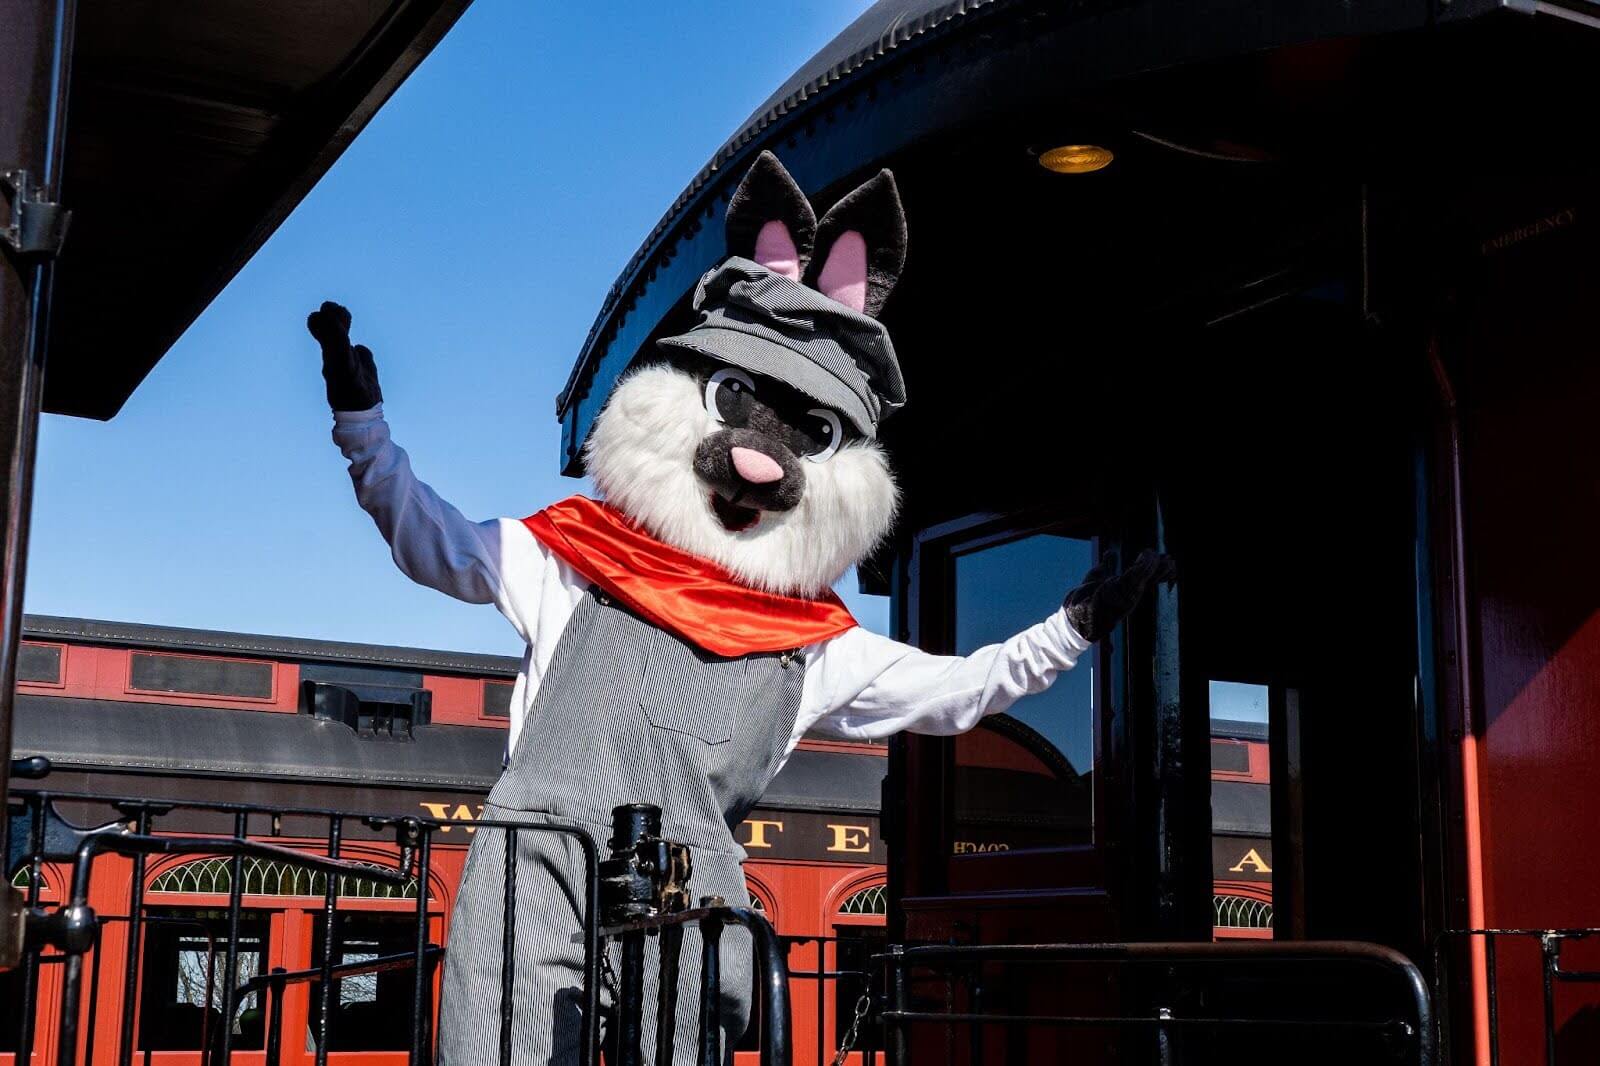 The easter bunny standing and waving from the caboose of the train.